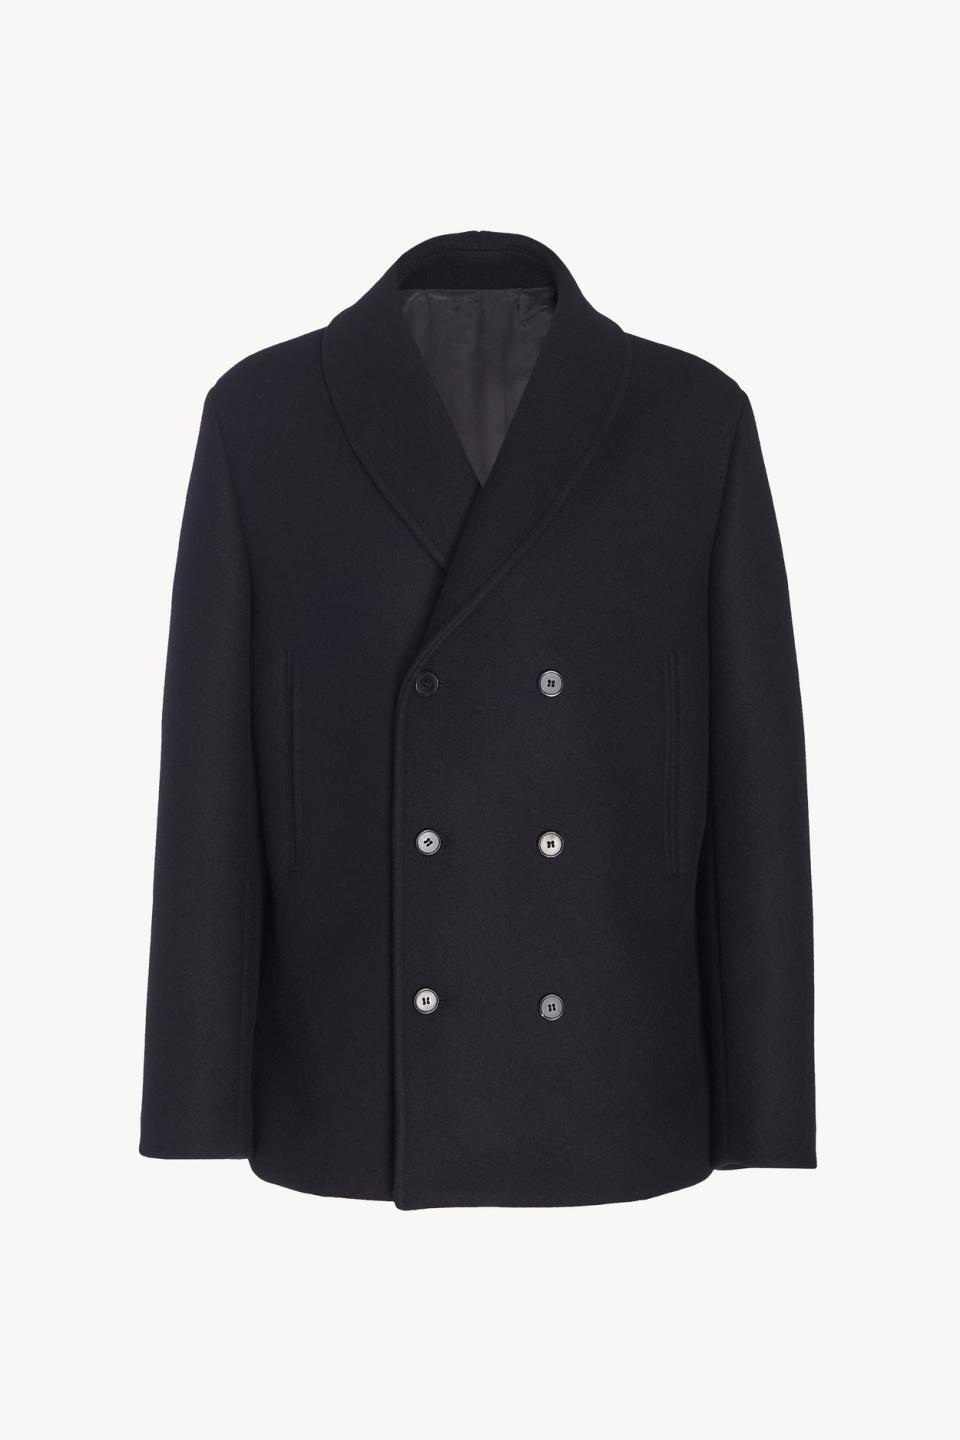 The Row Andrew Jacket in Wool